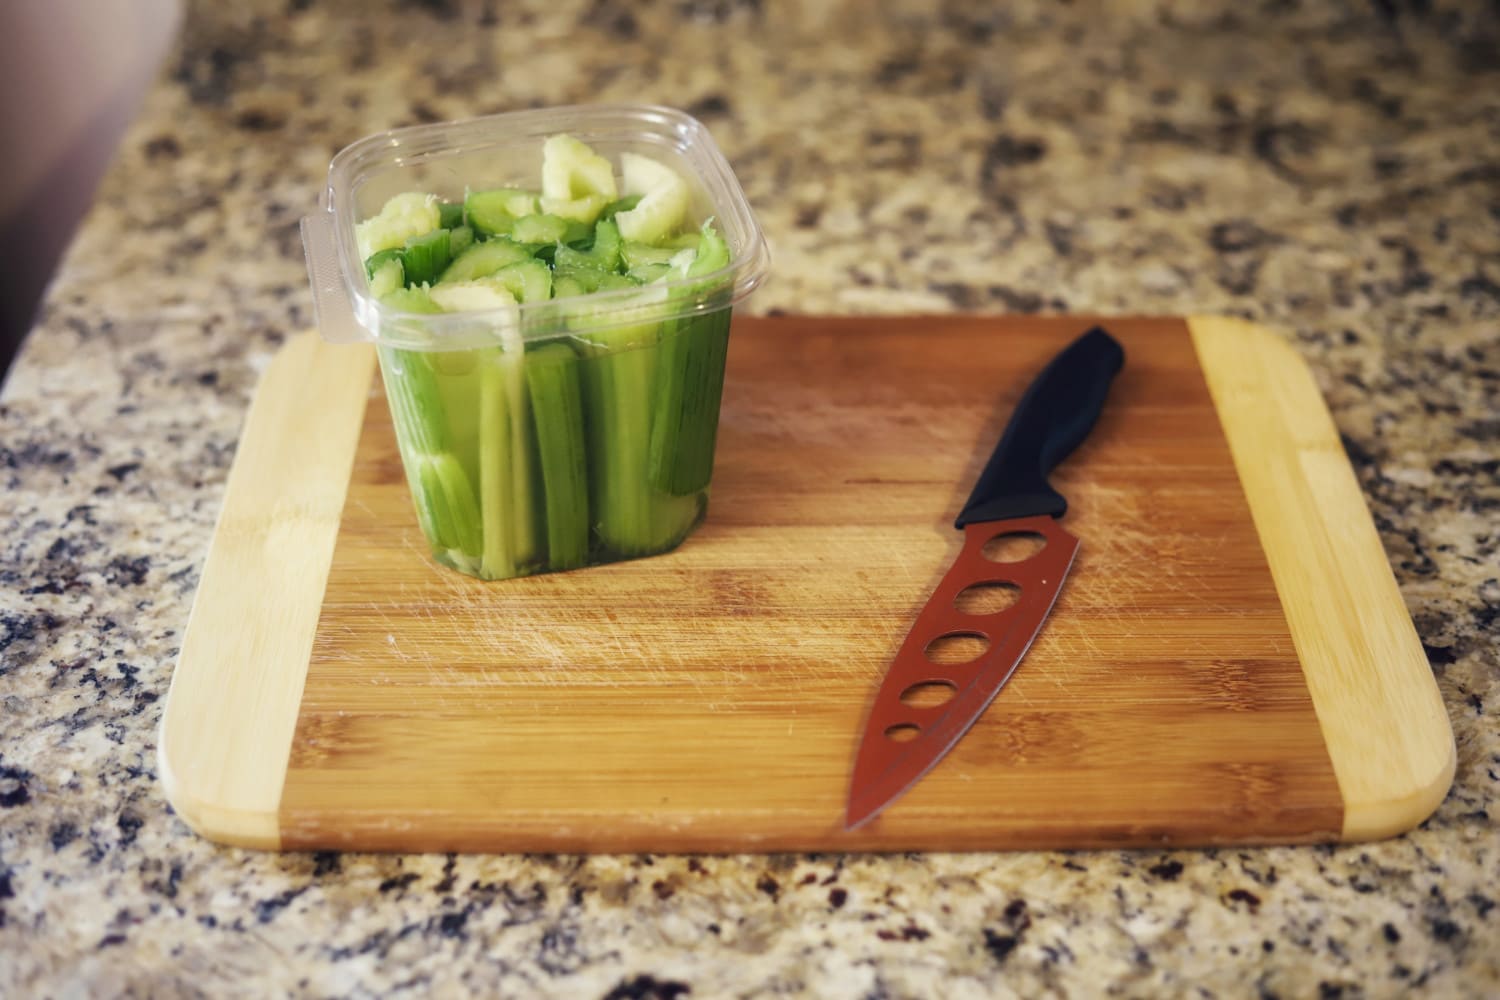 How To Store Celery After Cutting